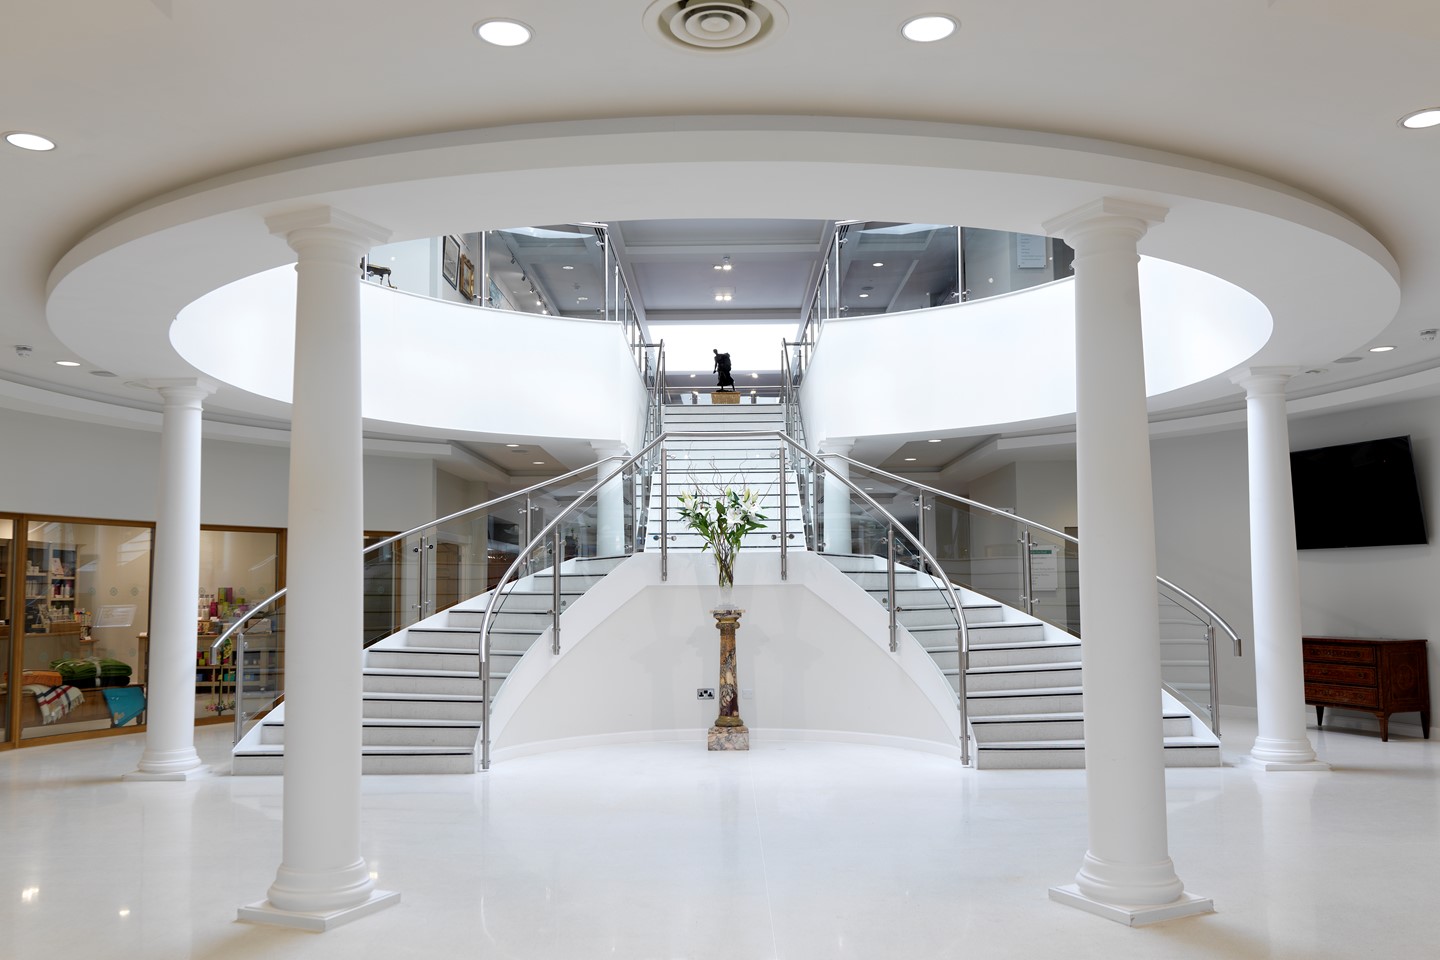 Garden Rooms entrance in the reception area, with the double staircase and white pillars